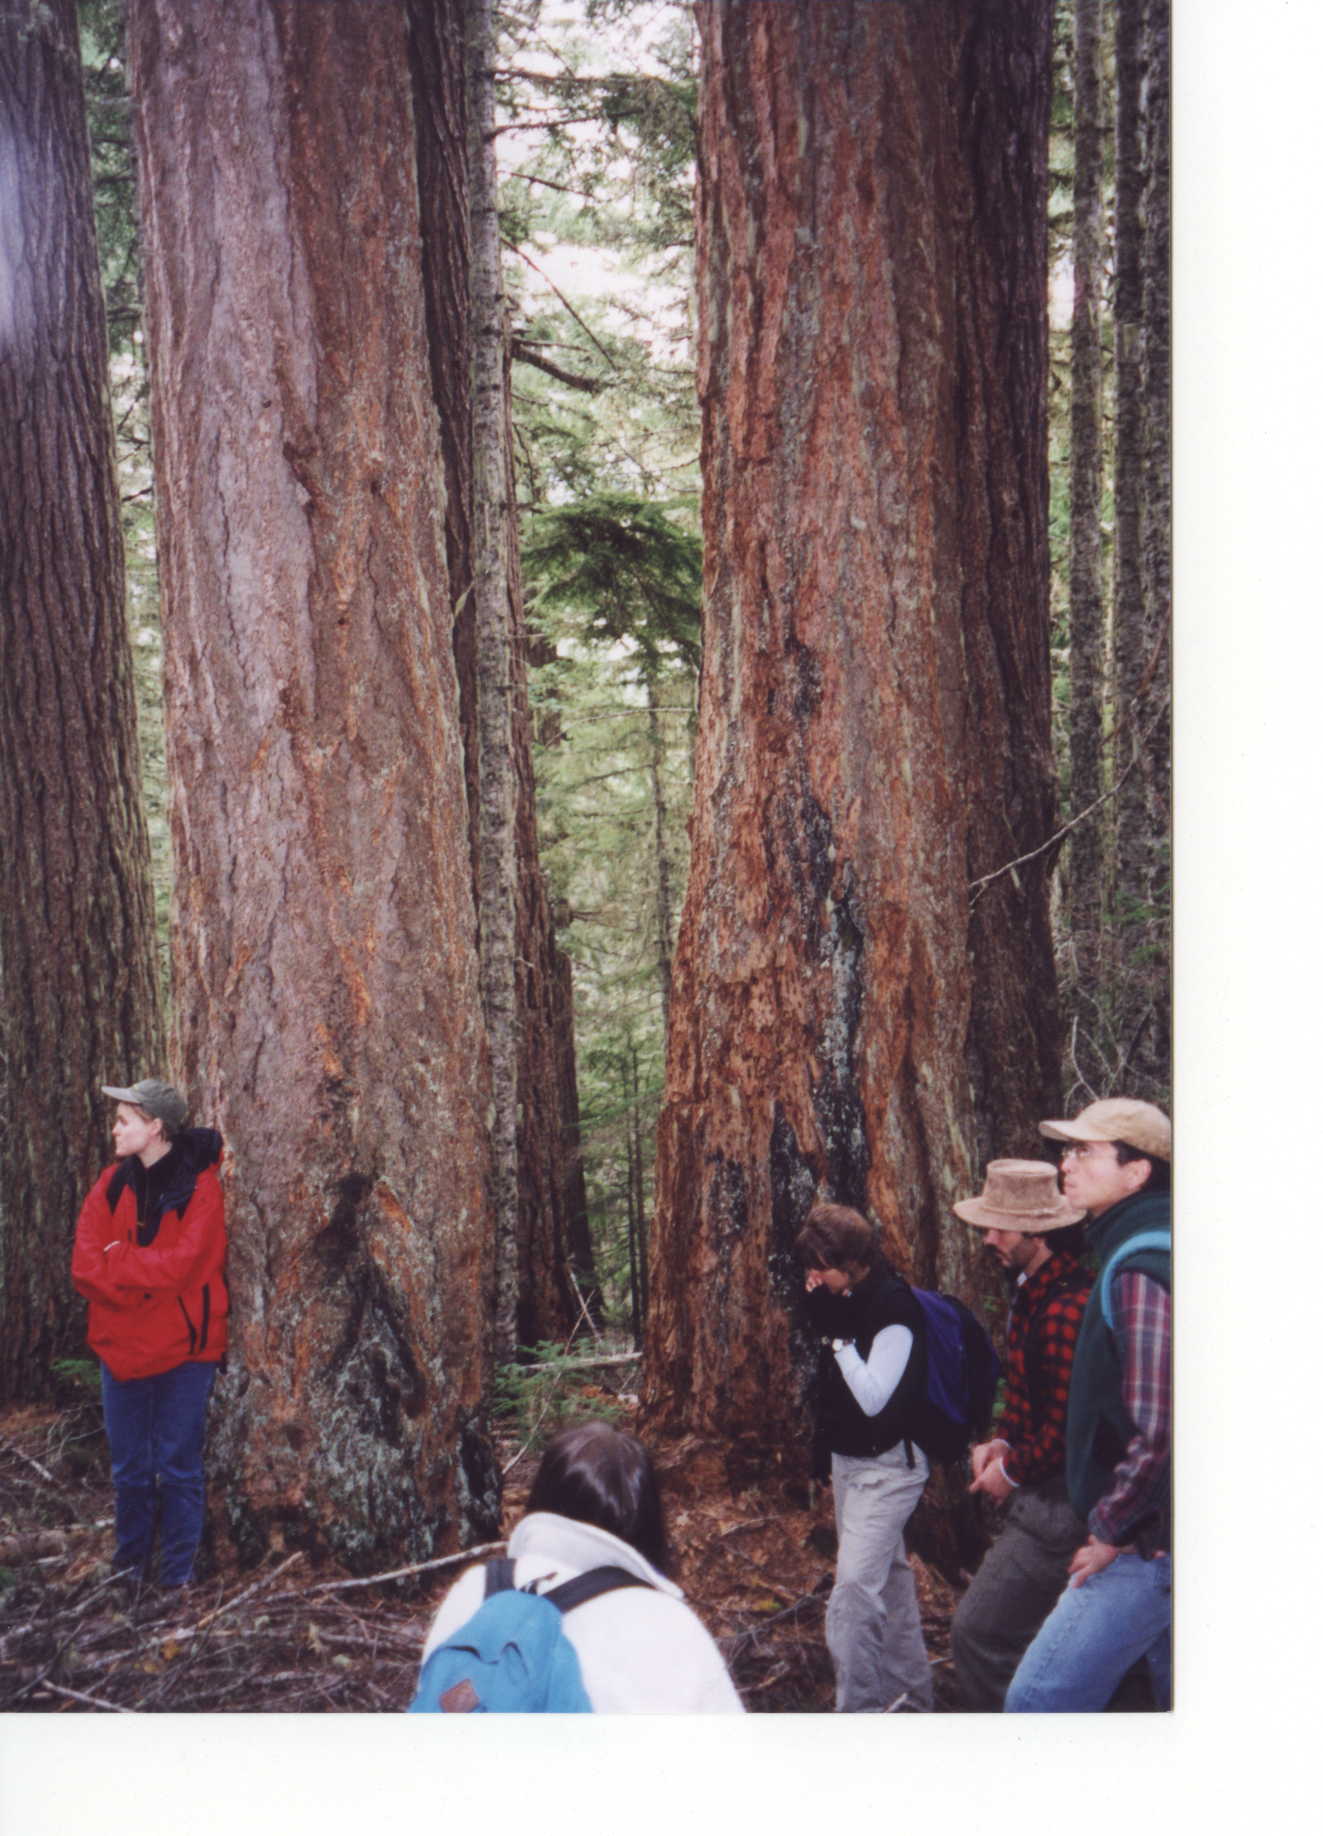 This is a photo taken in the Shellwood Timber Sale with volunteers amongst old growth.